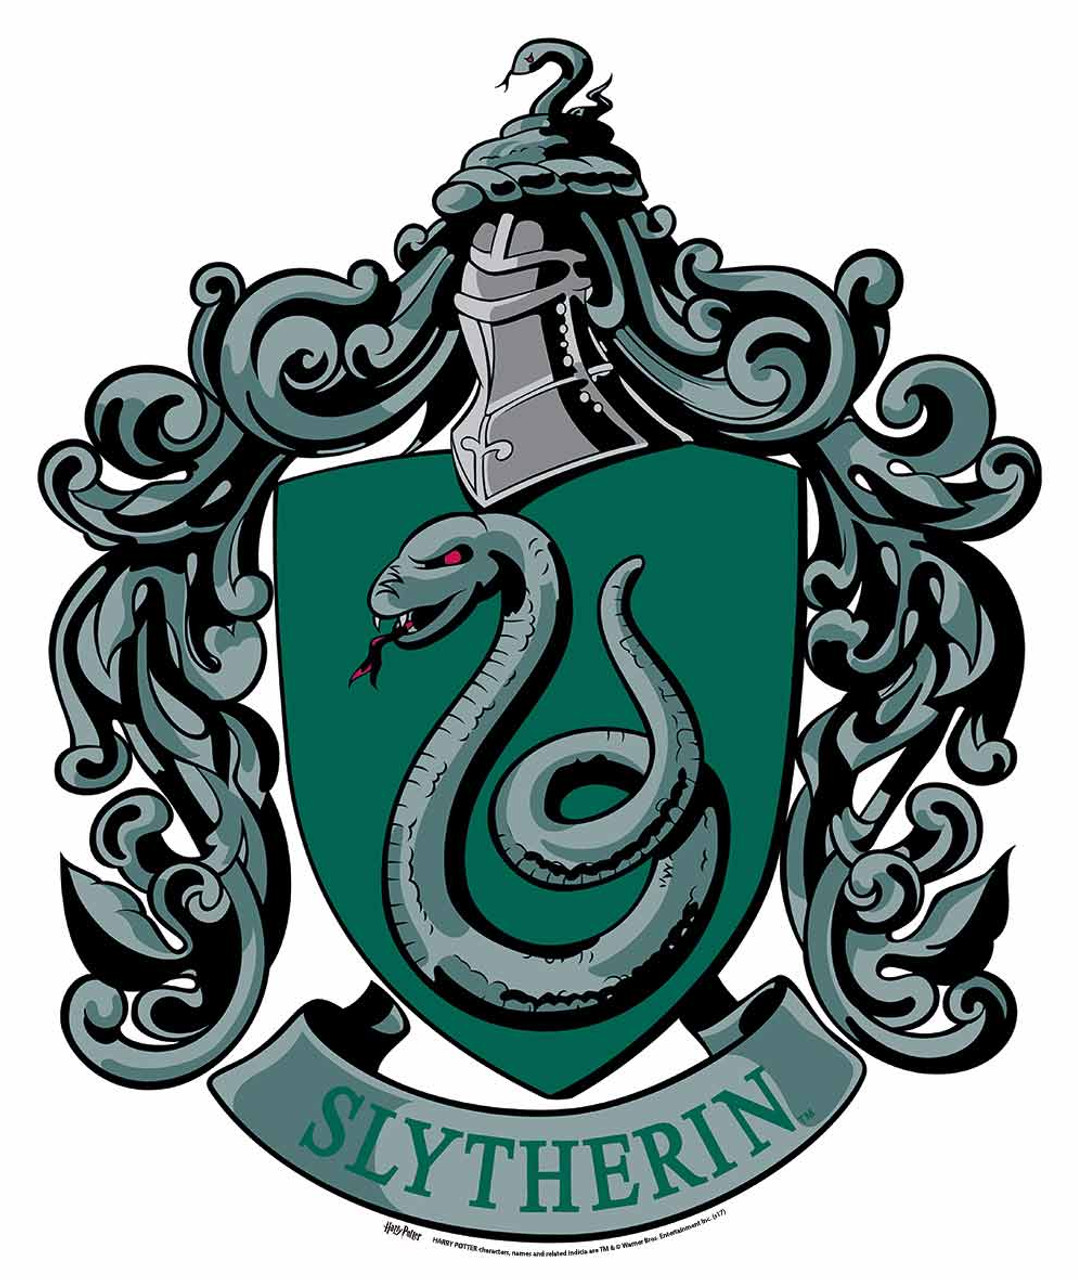 Slytherin from House of Spells